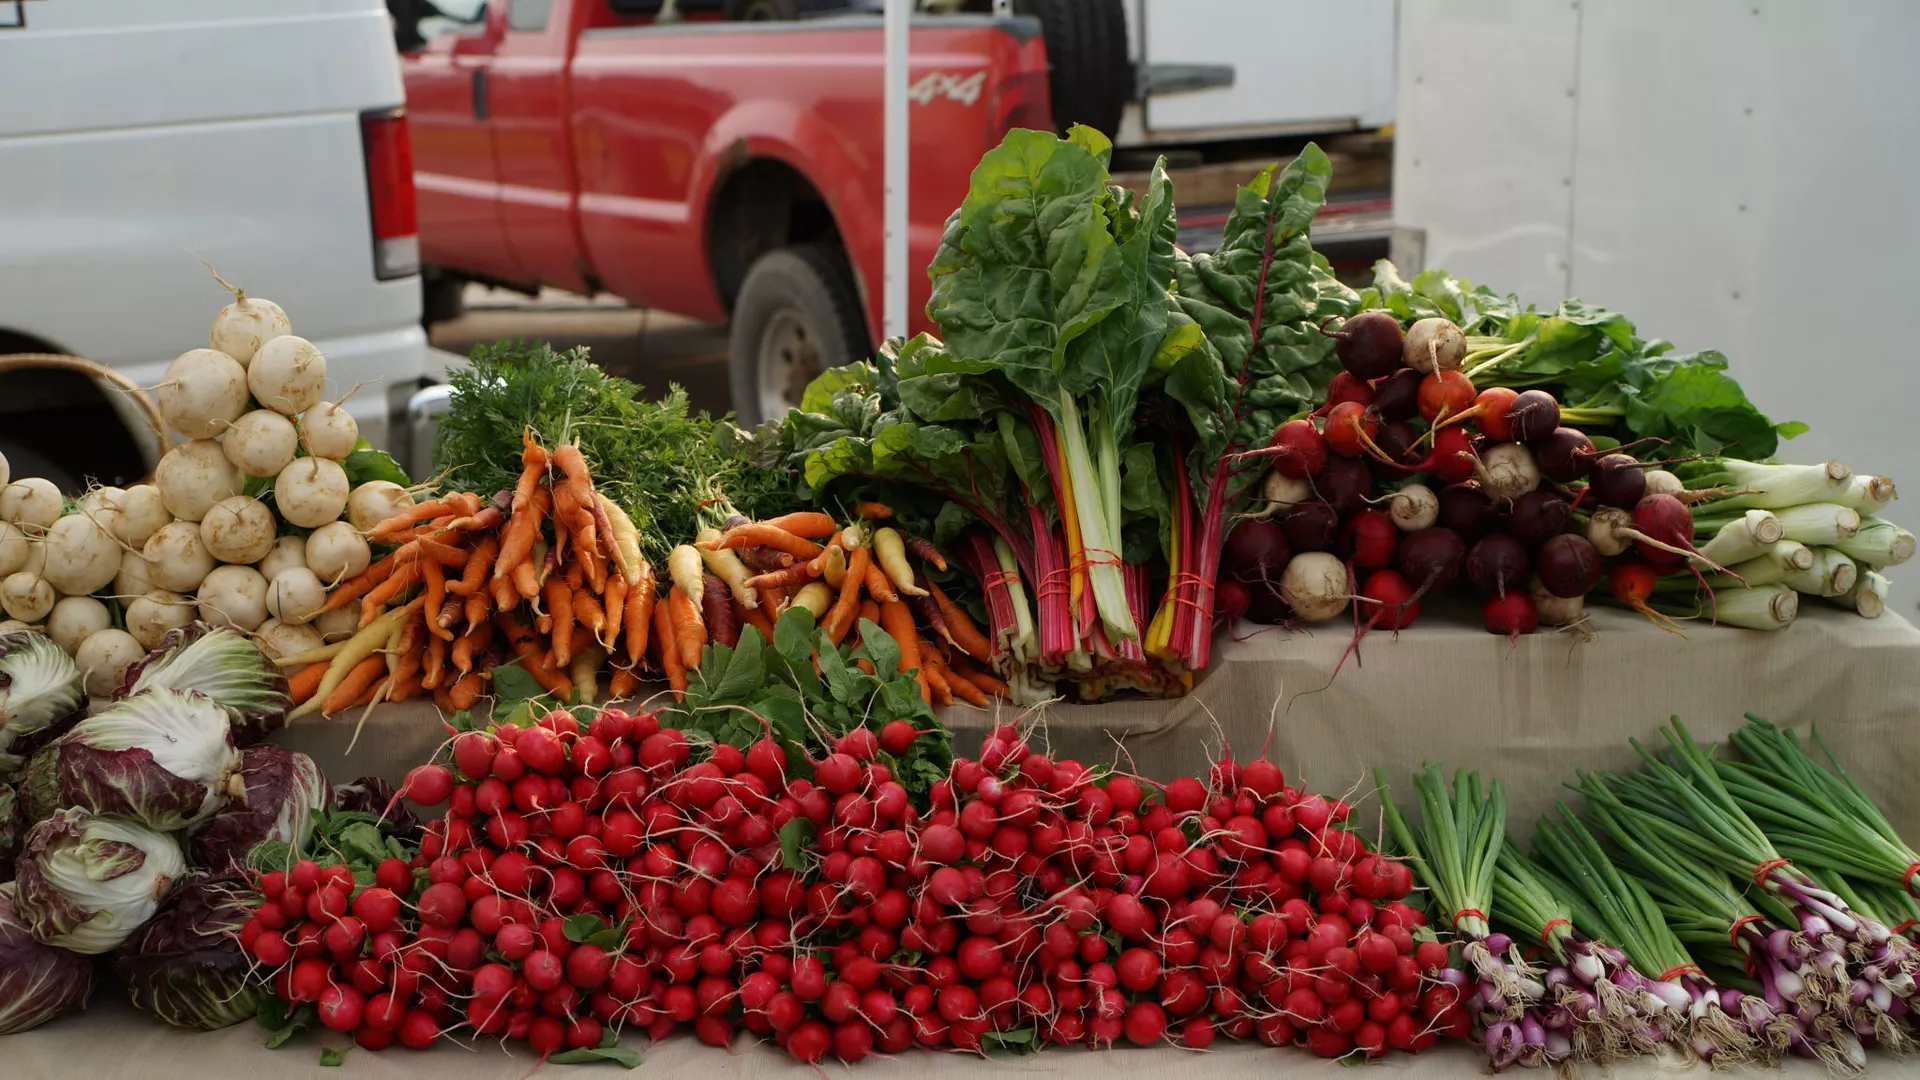 Browse Minnesota-grown produce at the Mill City Farmers Market this year. Photo courtesy of Mill City Farmers Market